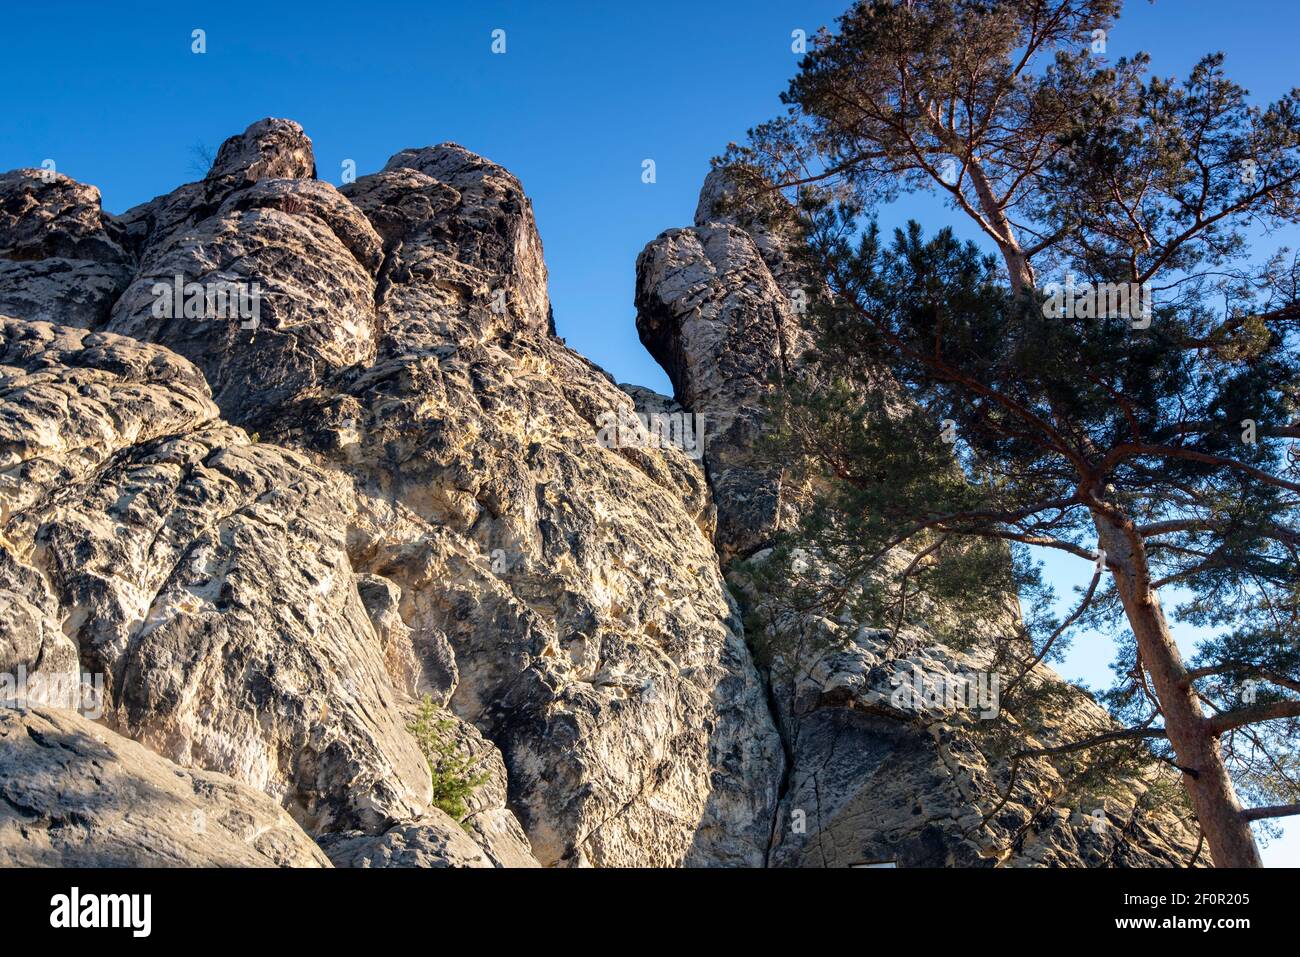 Germany, Saxony-Anhalt, Timmenrode, Hamburg coat of arms, part of the Devil's Wall in the Harz Mountains. Stock Photo